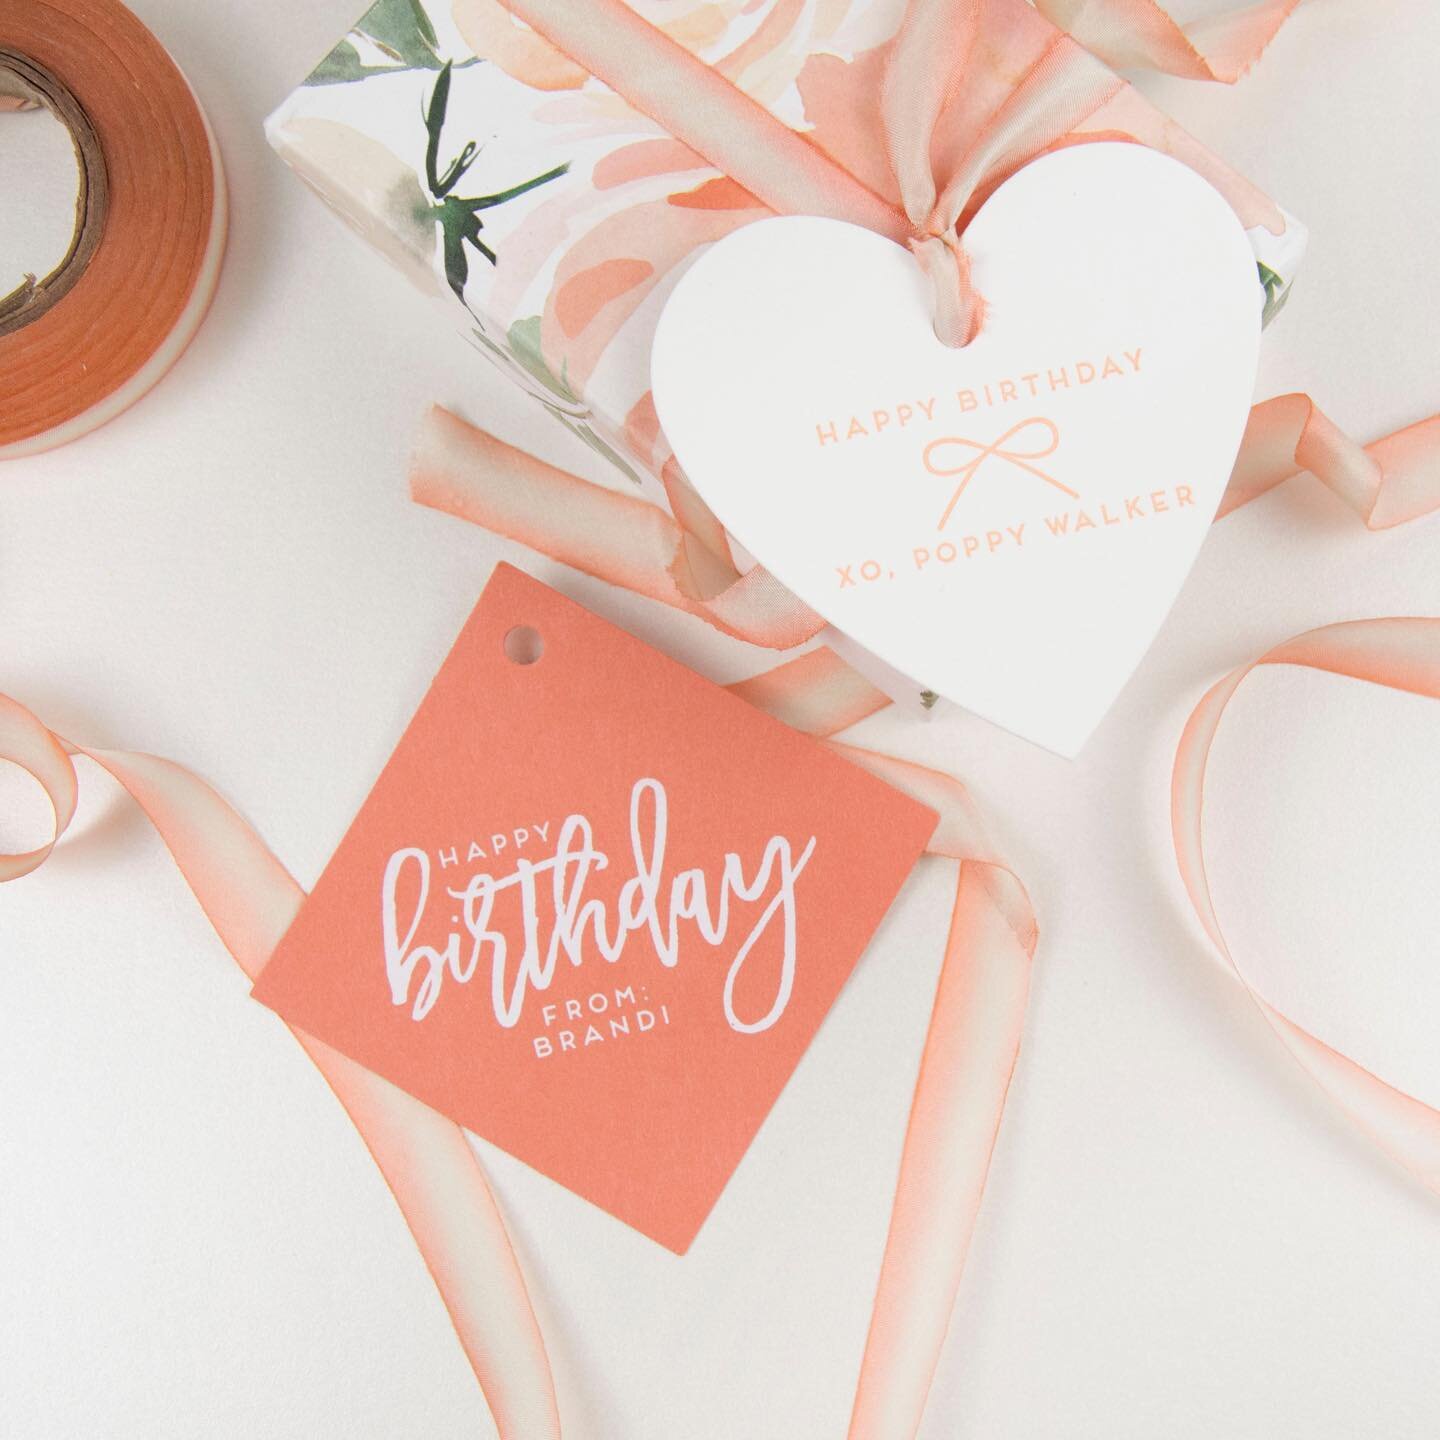 Our gift tag event continues! Order 50 personalized tags and receive 25 additional ones for free. It&rsquo;s the best time to stock up on Christmas, birthday, and wine tags!